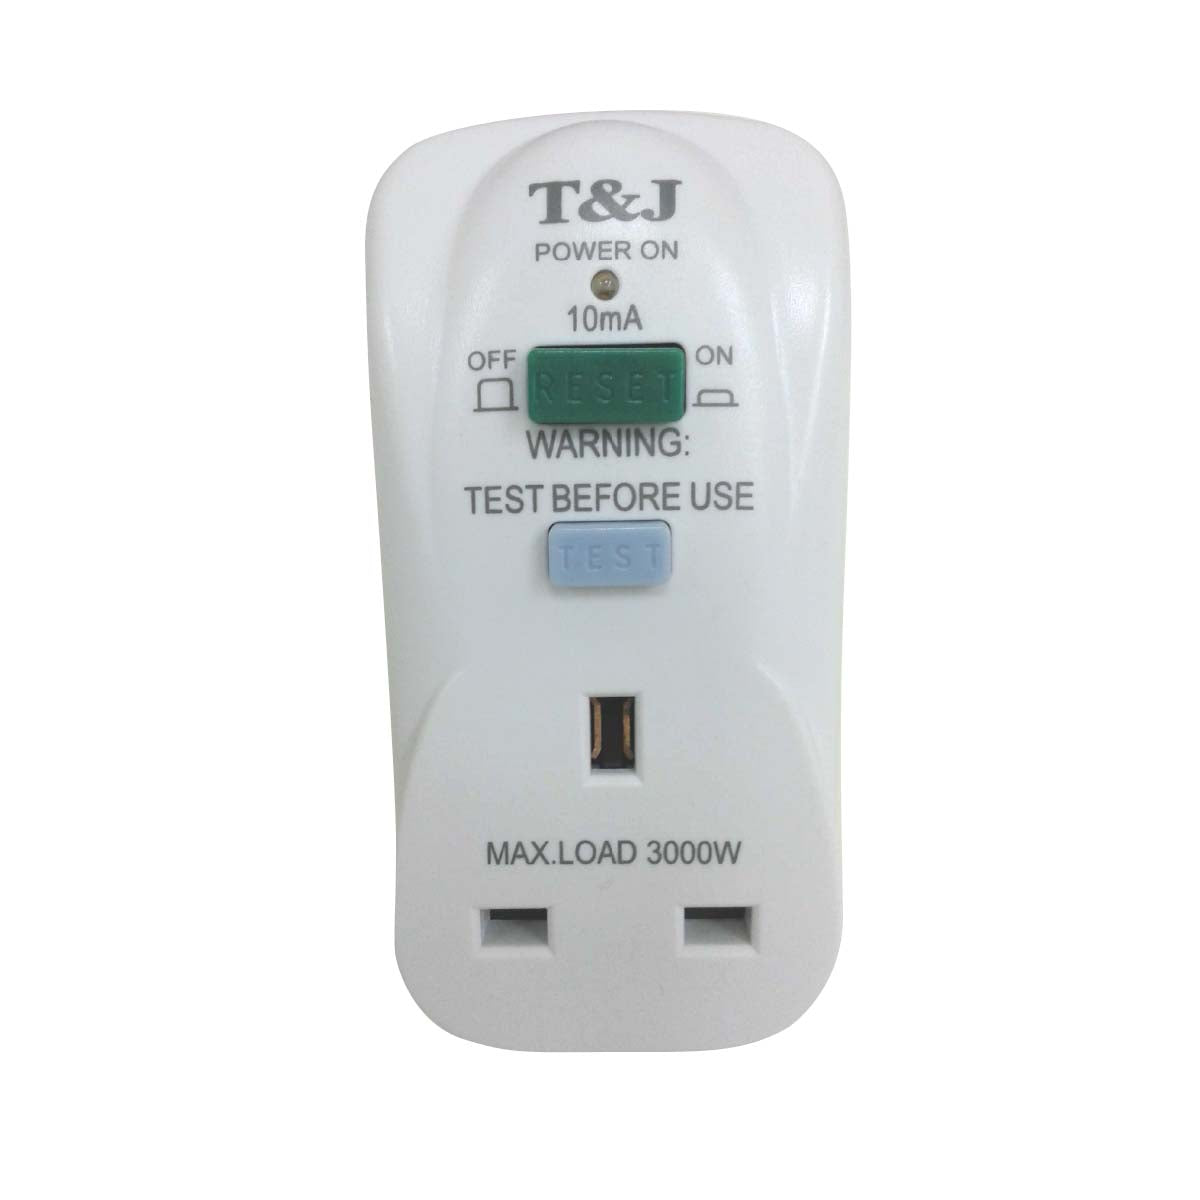 T&J Electric RCD Safety Protection Socket Adaptor (K7813RCD) ***